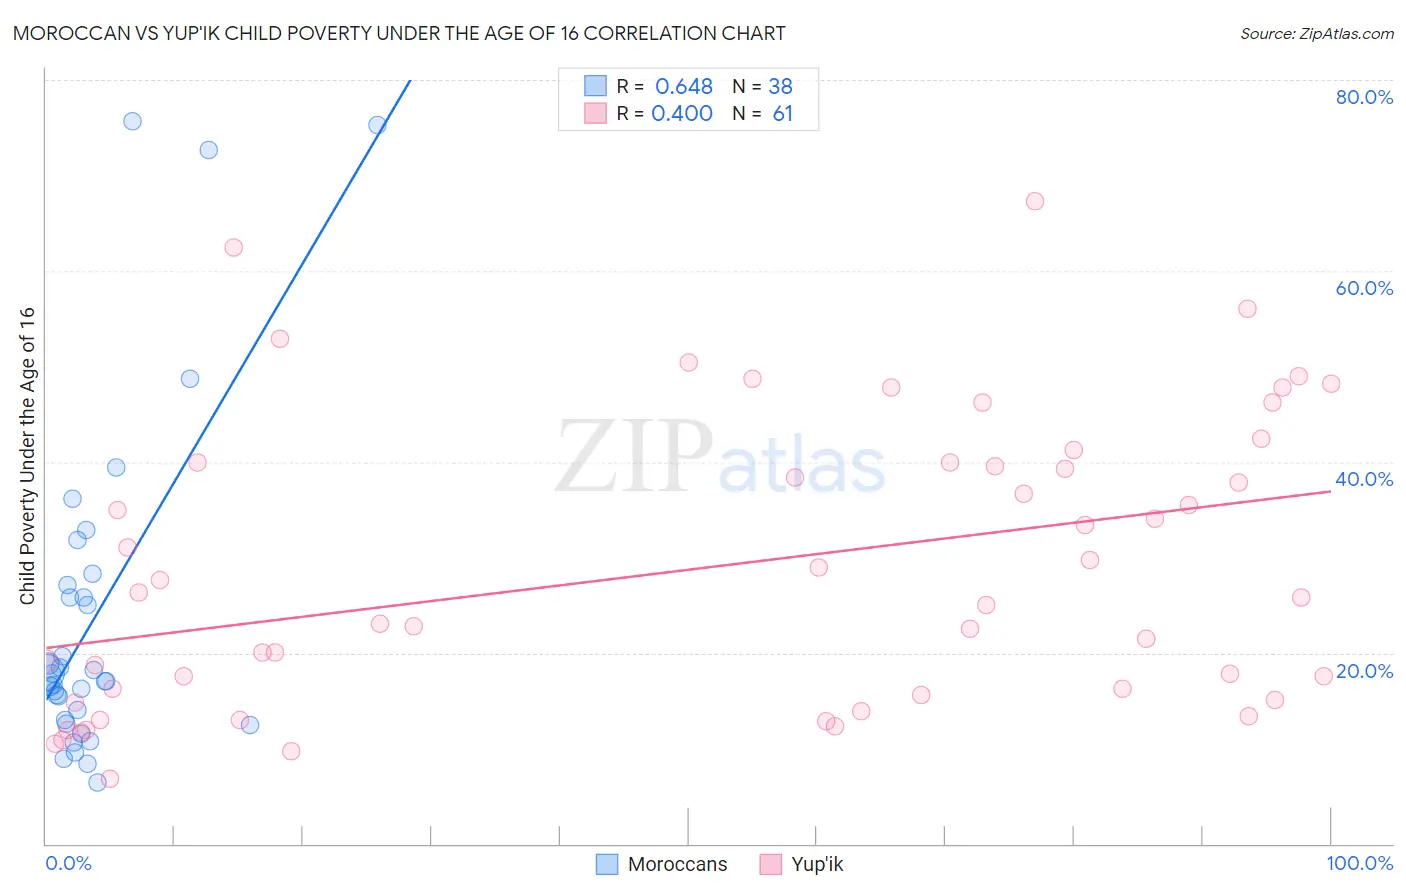 Moroccan vs Yup'ik Child Poverty Under the Age of 16